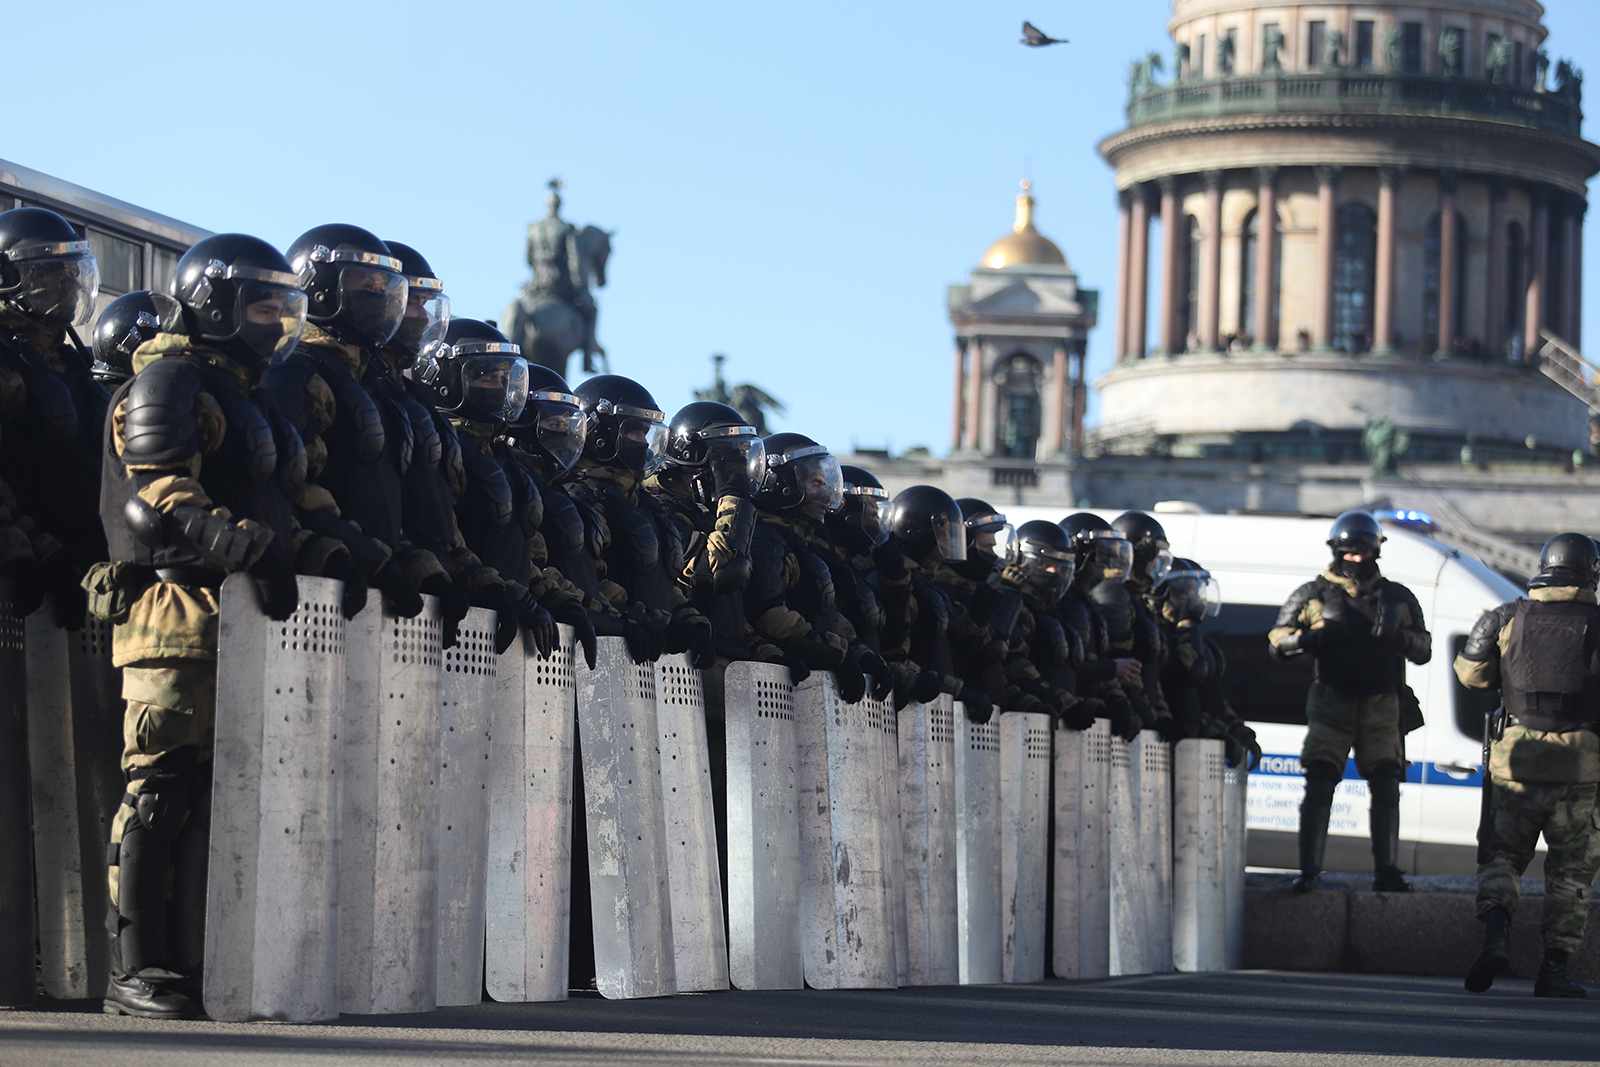 Security forces take measures during an anti-war demonstration in St. Petersburg, Russia on March 6.